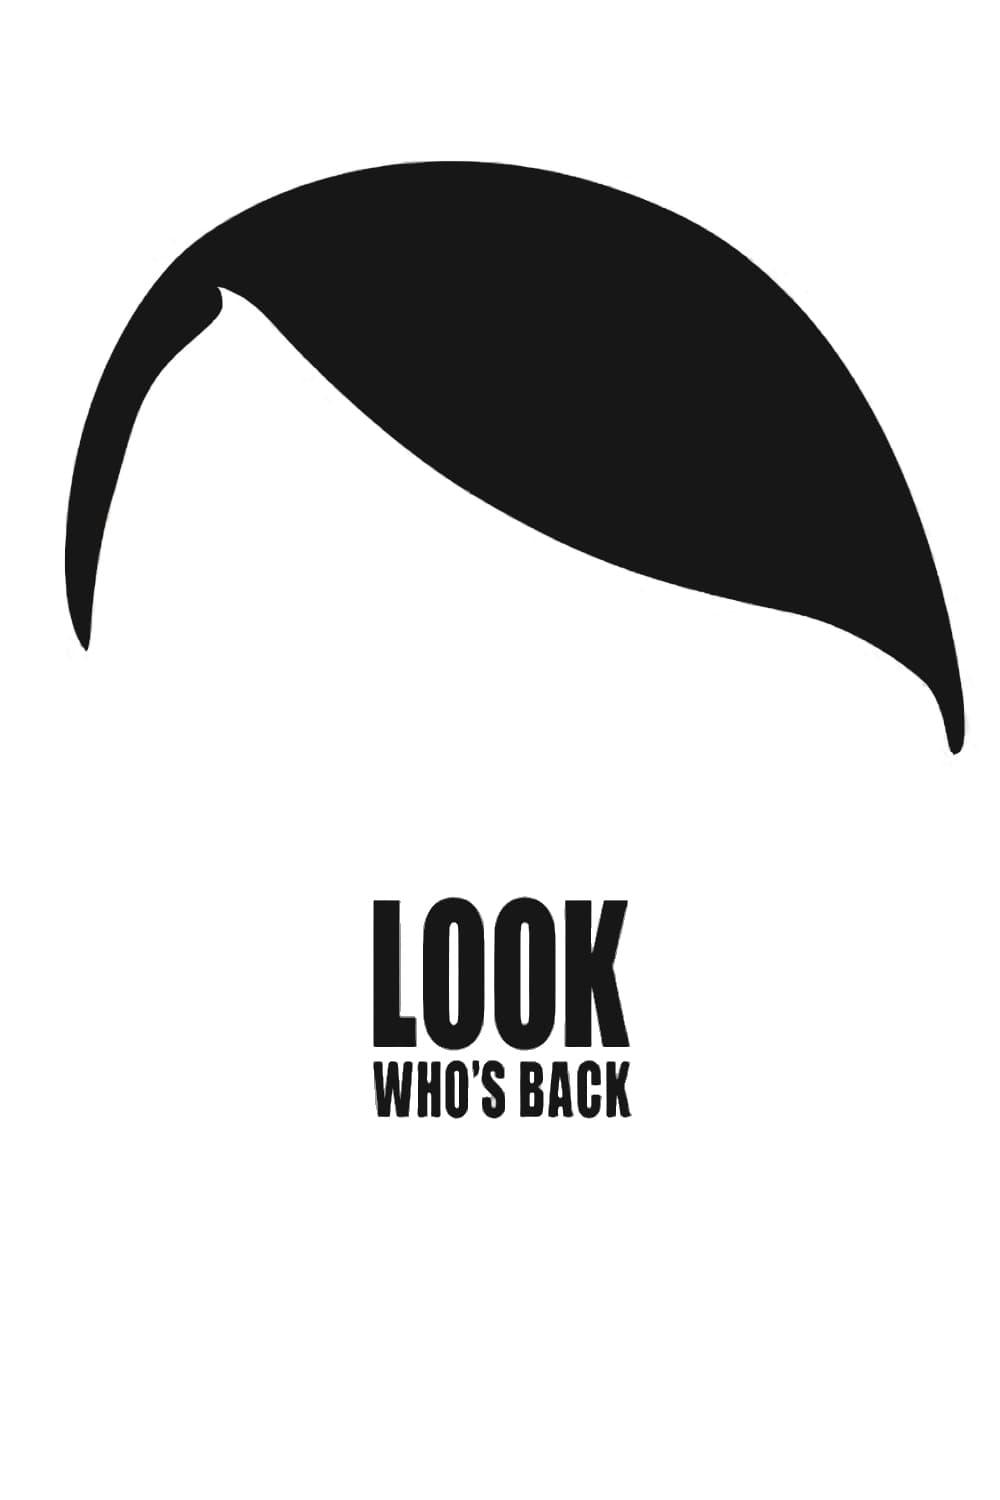 Look Who's Back poster